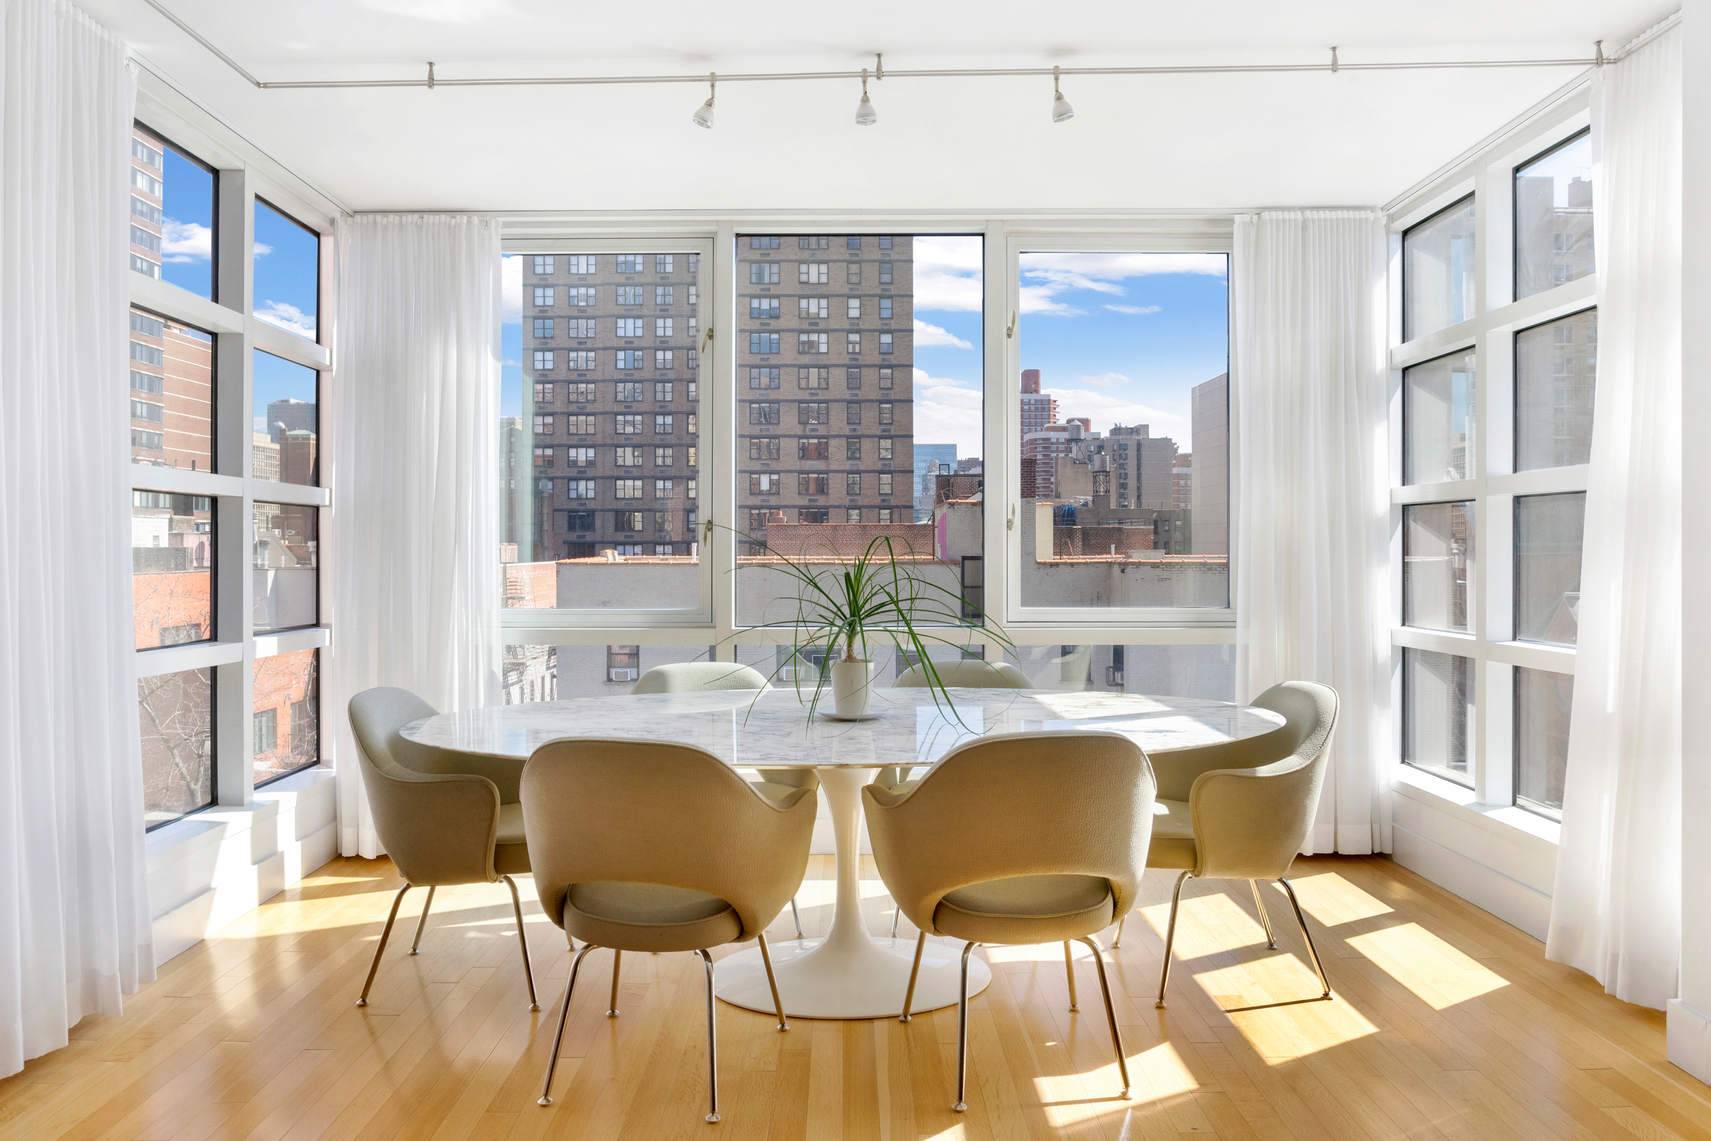 At the crossroads of NoMad, Gramercy and Kips Bay, you will find this fabulous boutique condo with great light, views, privacy, and a clean contemporary design.